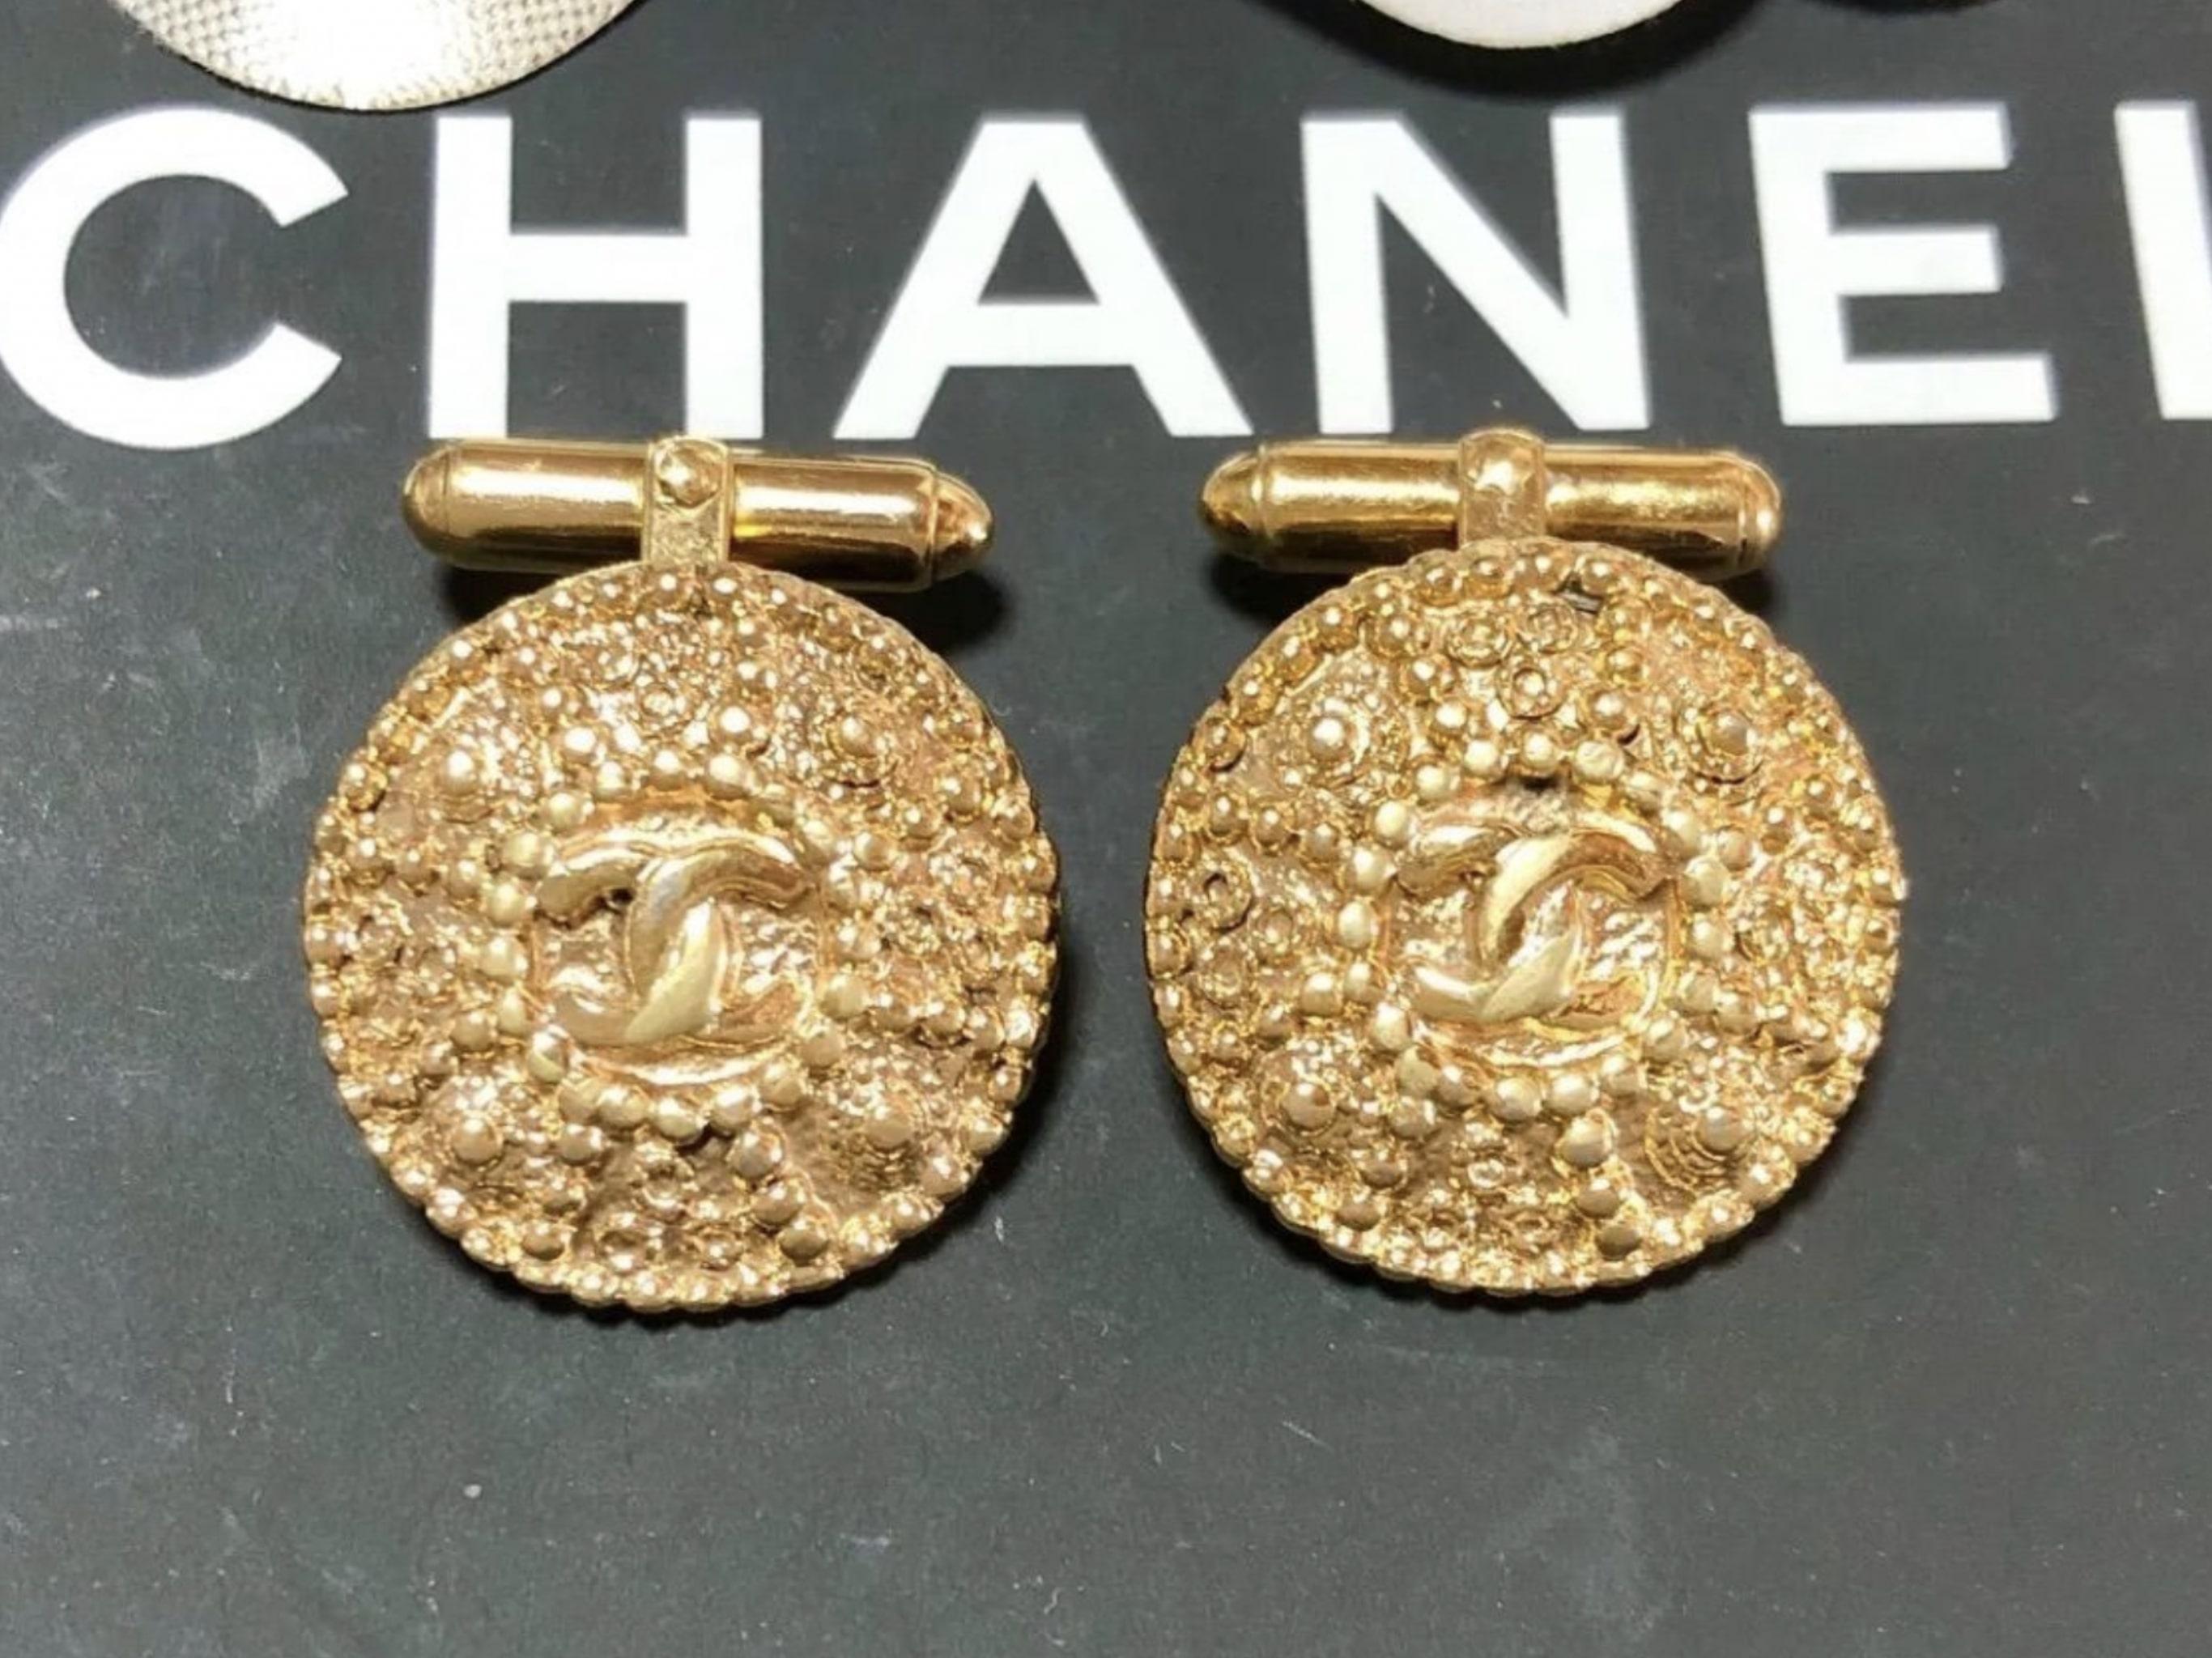 Chanel Cufflinks 
Coco Mark Gold Logo 
Round, Vintage, Authentic, Rare
Gold plated 
No original box
In great condition 
2.2 cm
Timeless, understated and chic. 